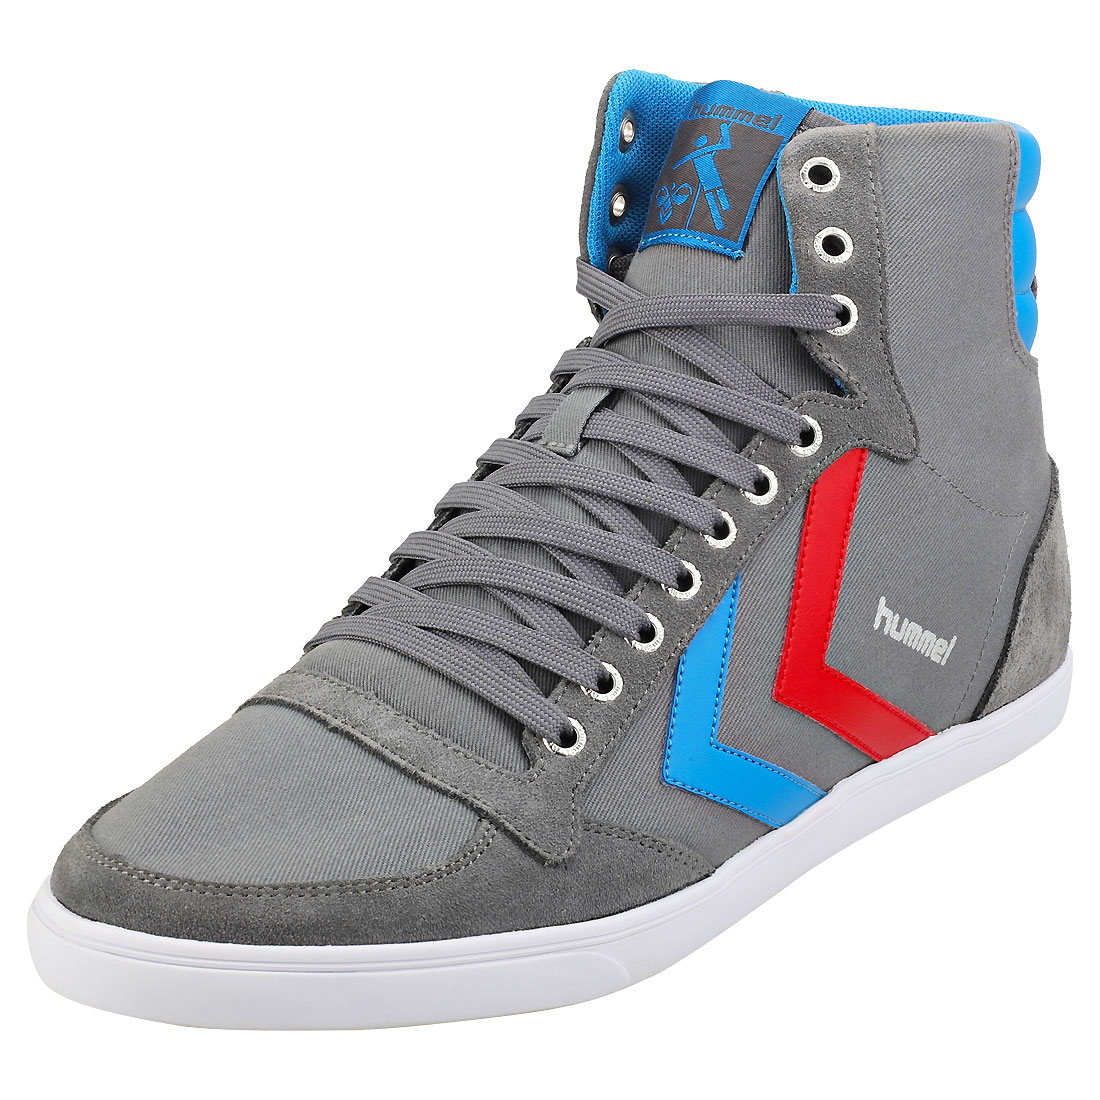 Slimmer Stadil High Mens Grey Blue Casual Trainers - 41 EU |